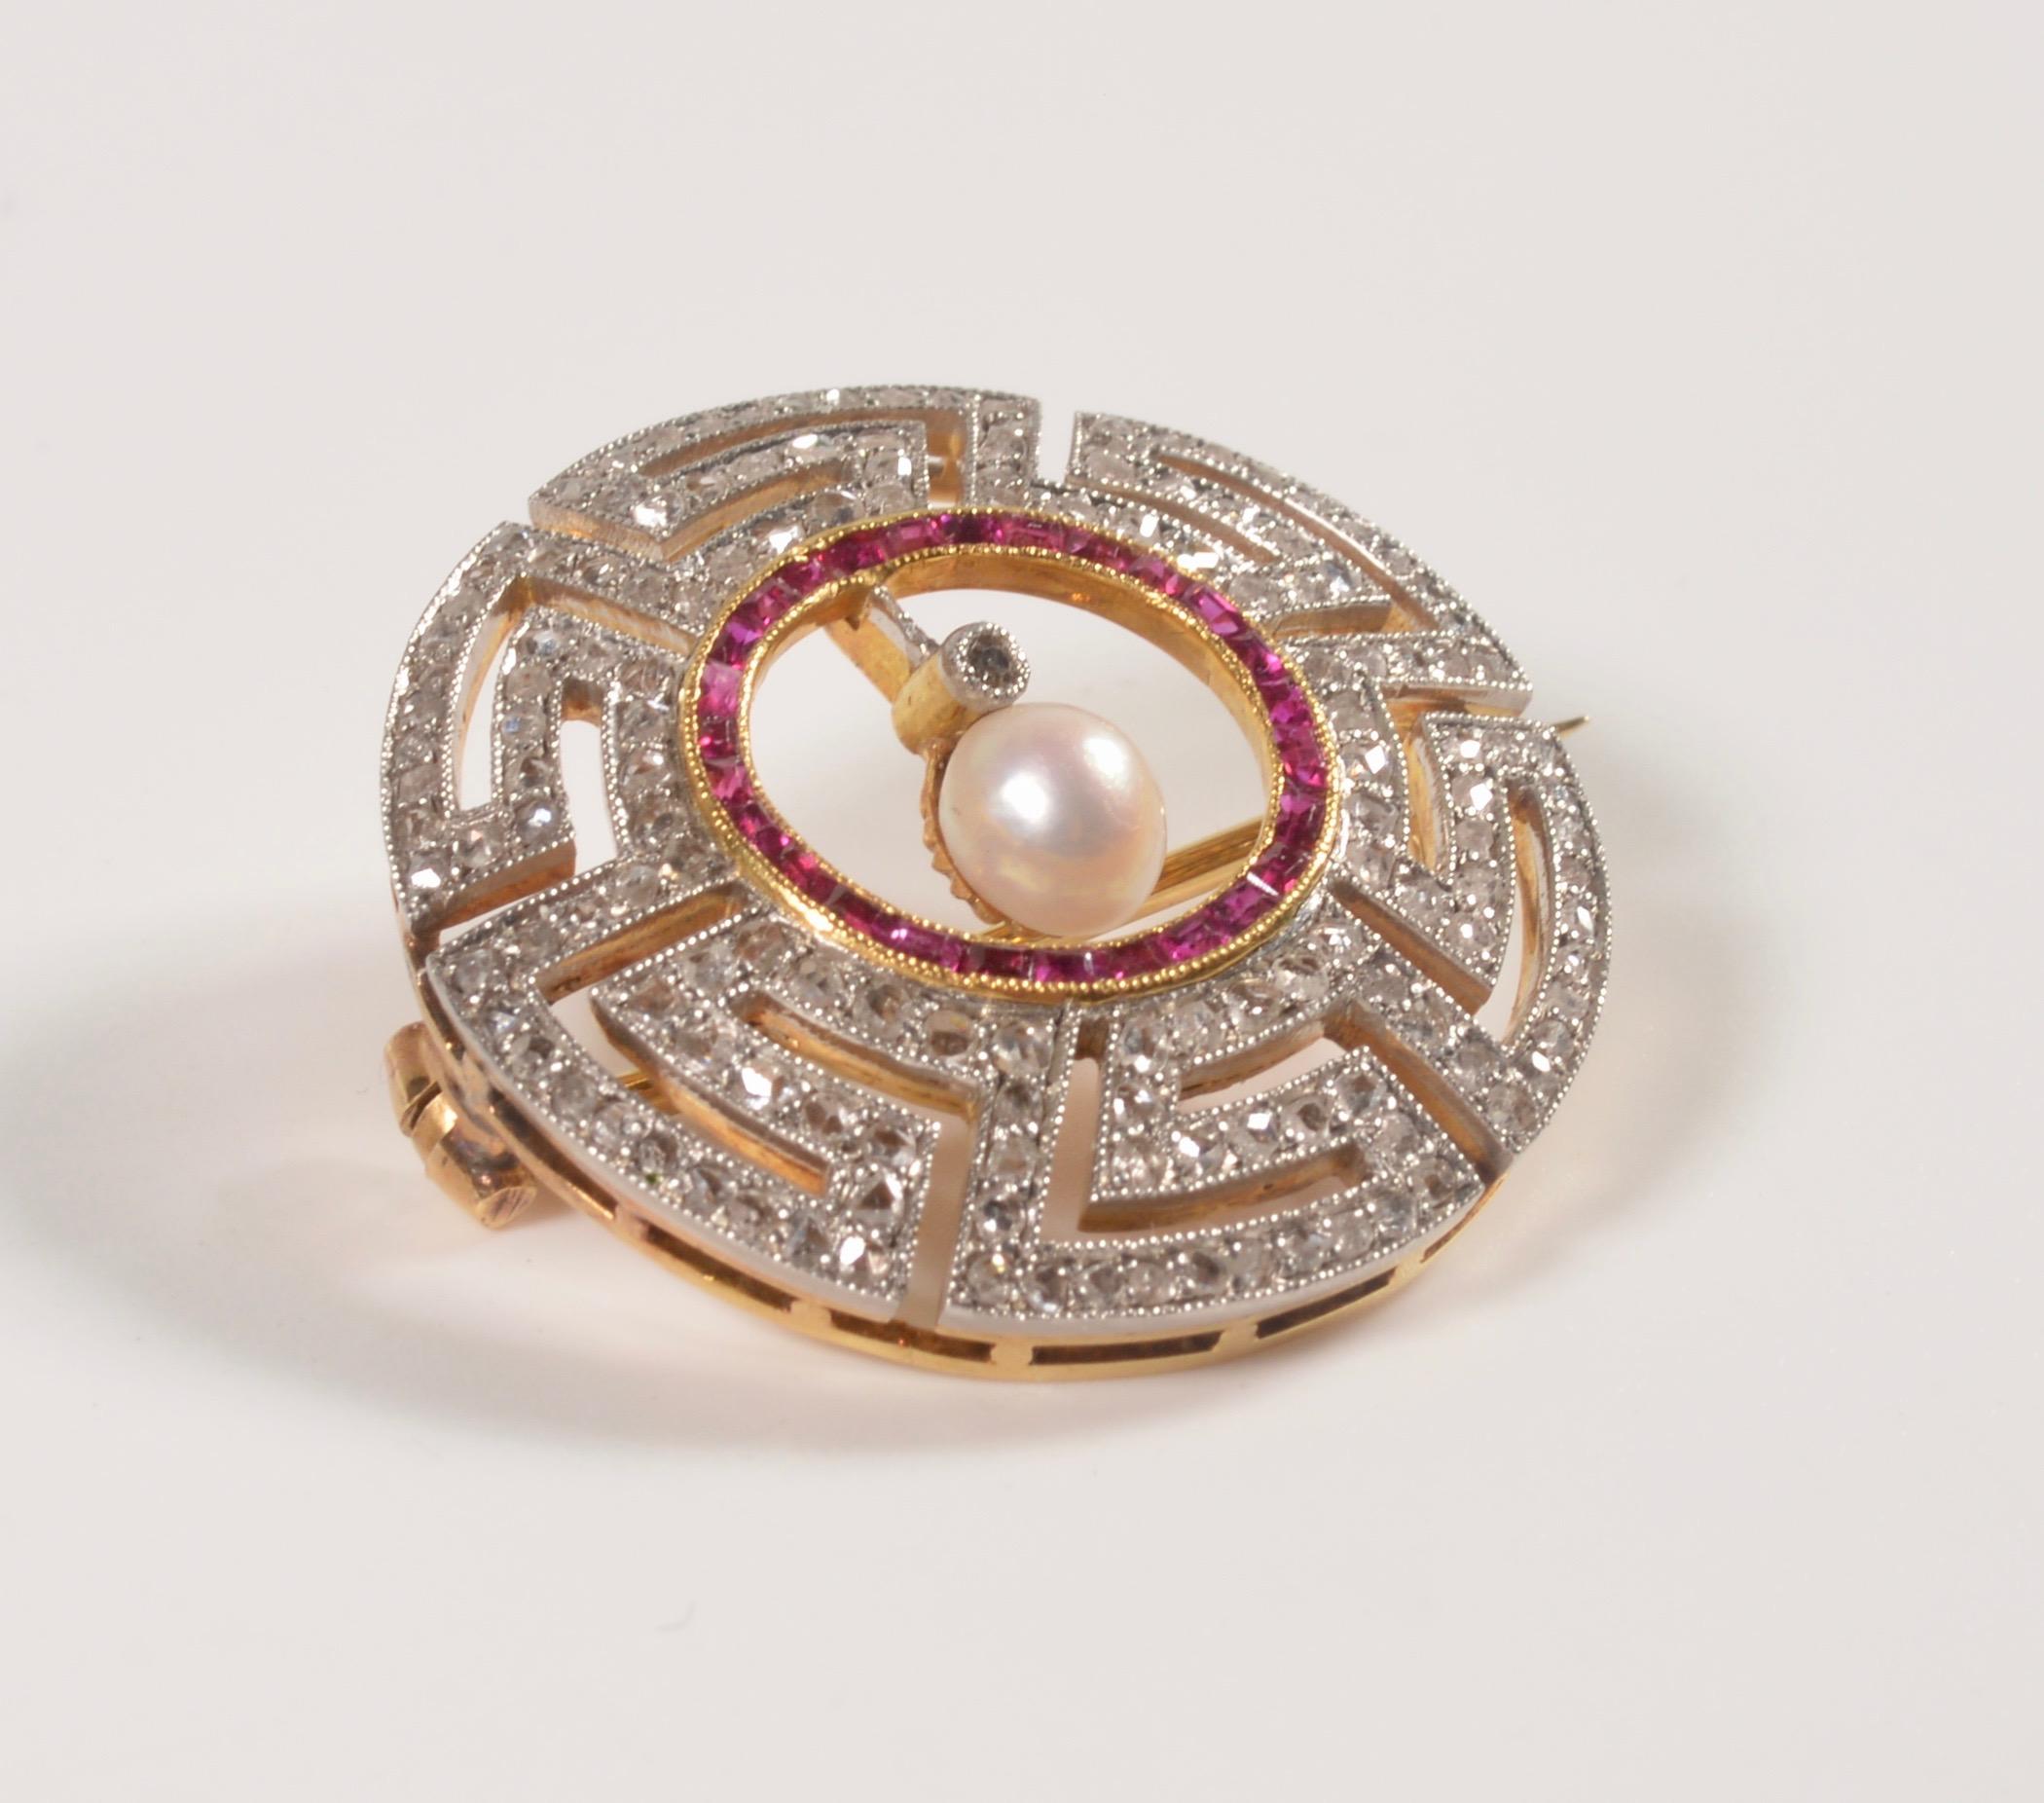 Classical and stylish Art Deco diamond and ruby brooch of exceptional quality suspending a cultured pearl, framed by rose-cut diamonds and channel-set rubies, platinum-topped gold Greek key geometric mount. From the collection of Edith Weber Antique